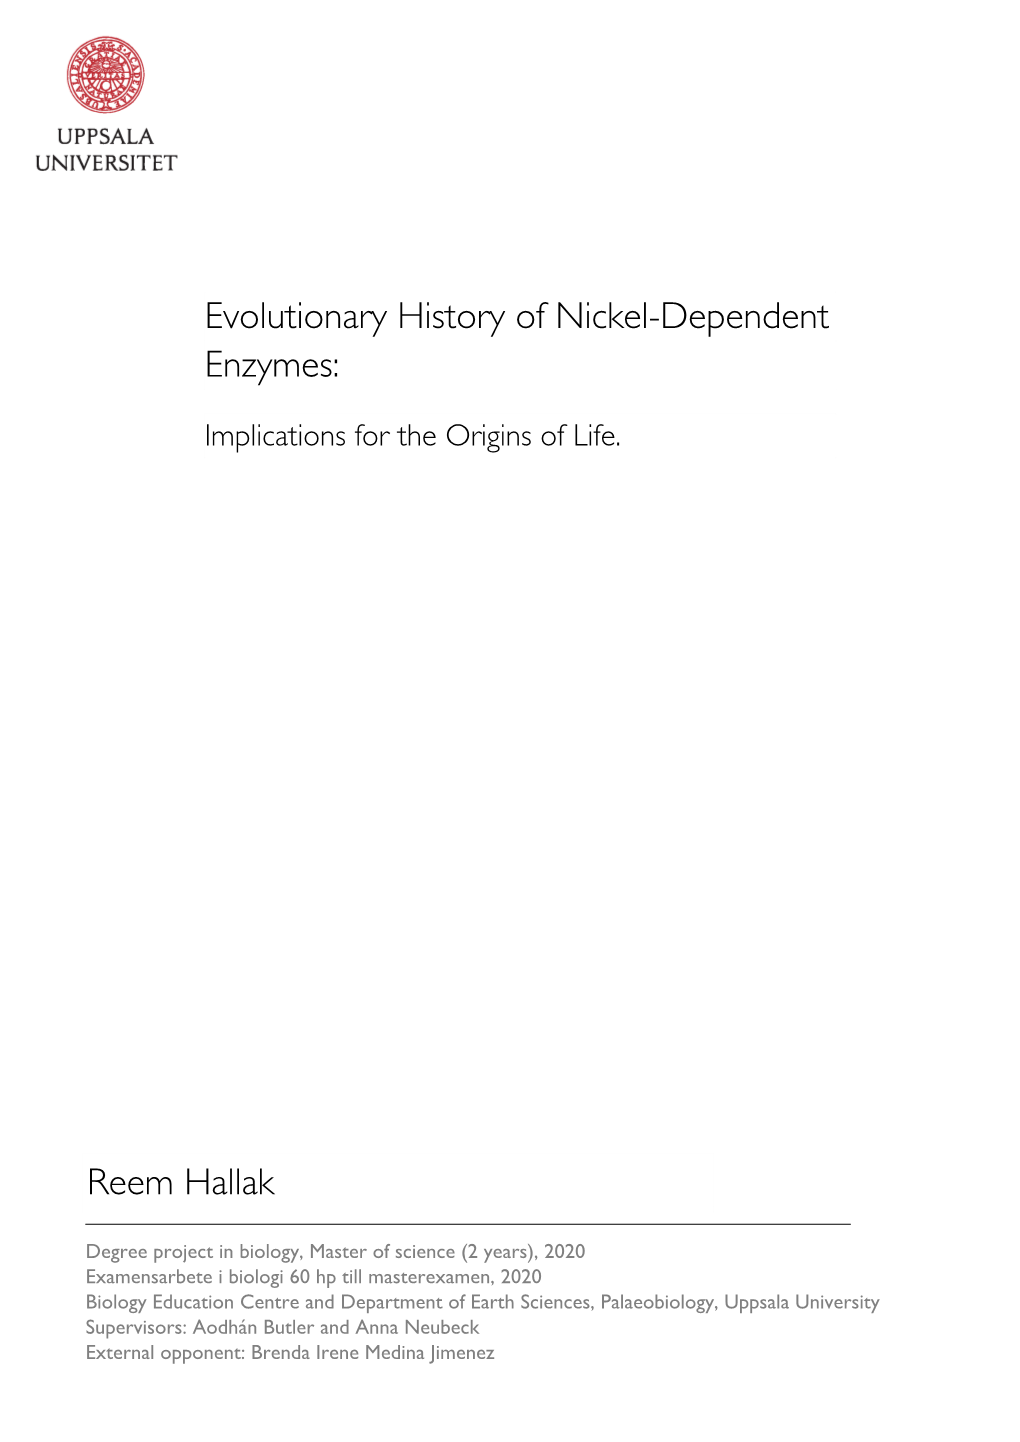 Evolutionary History of Nickel-Dependent Enzymes